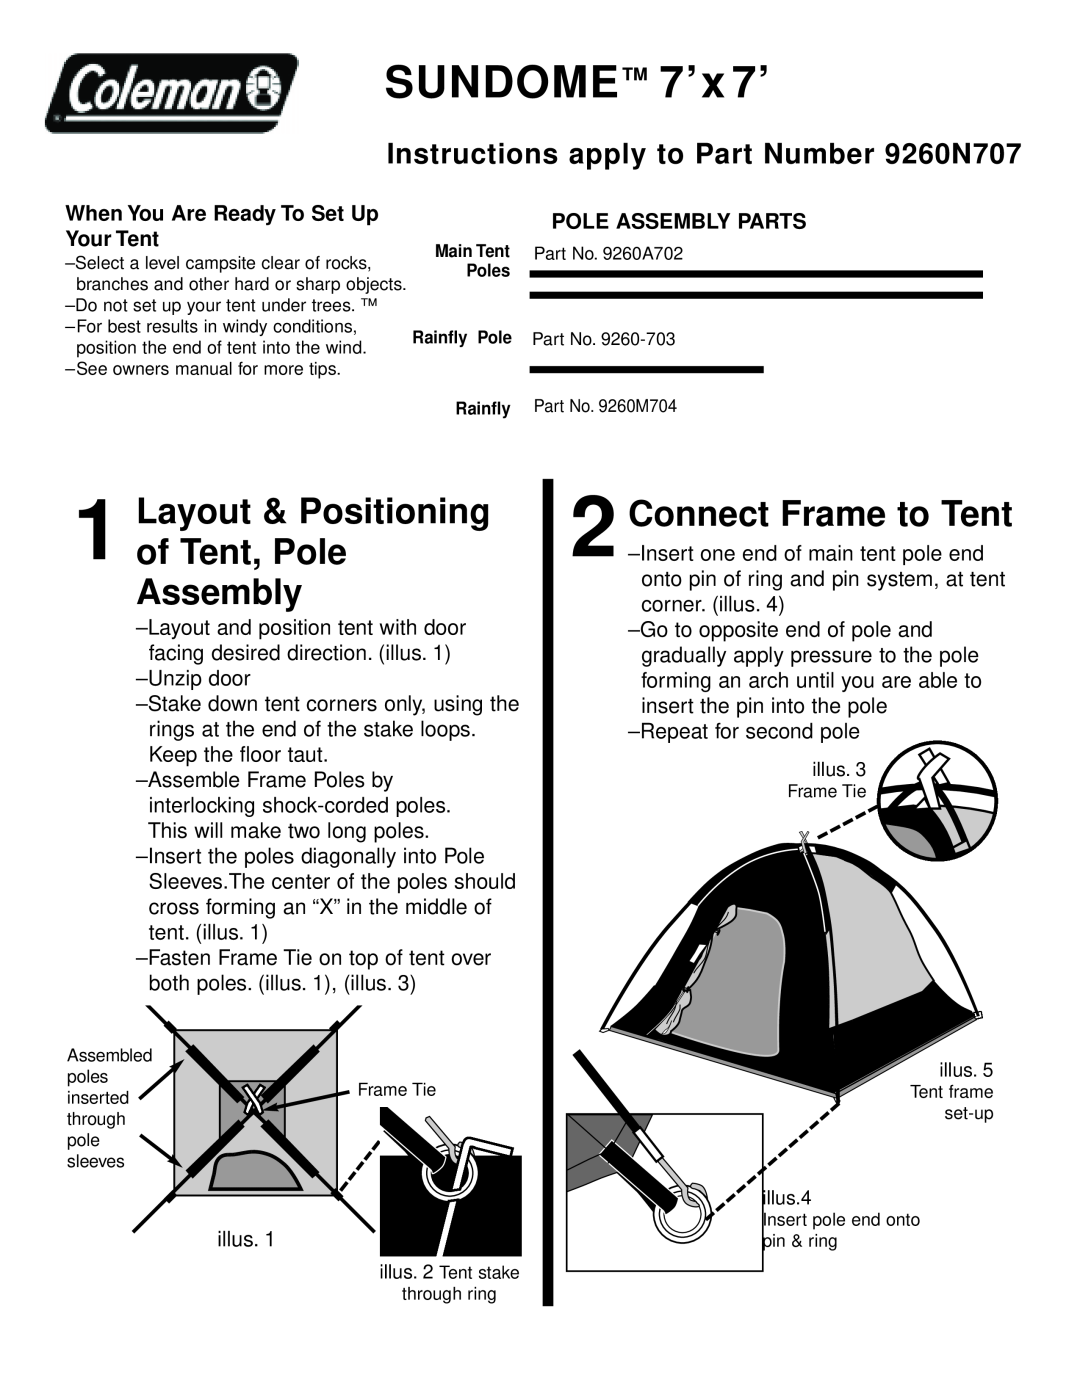 Coleman 9260A702 owner manual Layout & Positioning of Tent, Pole Assembly, Connect Frame to Tent, Pole Assembly Parts 